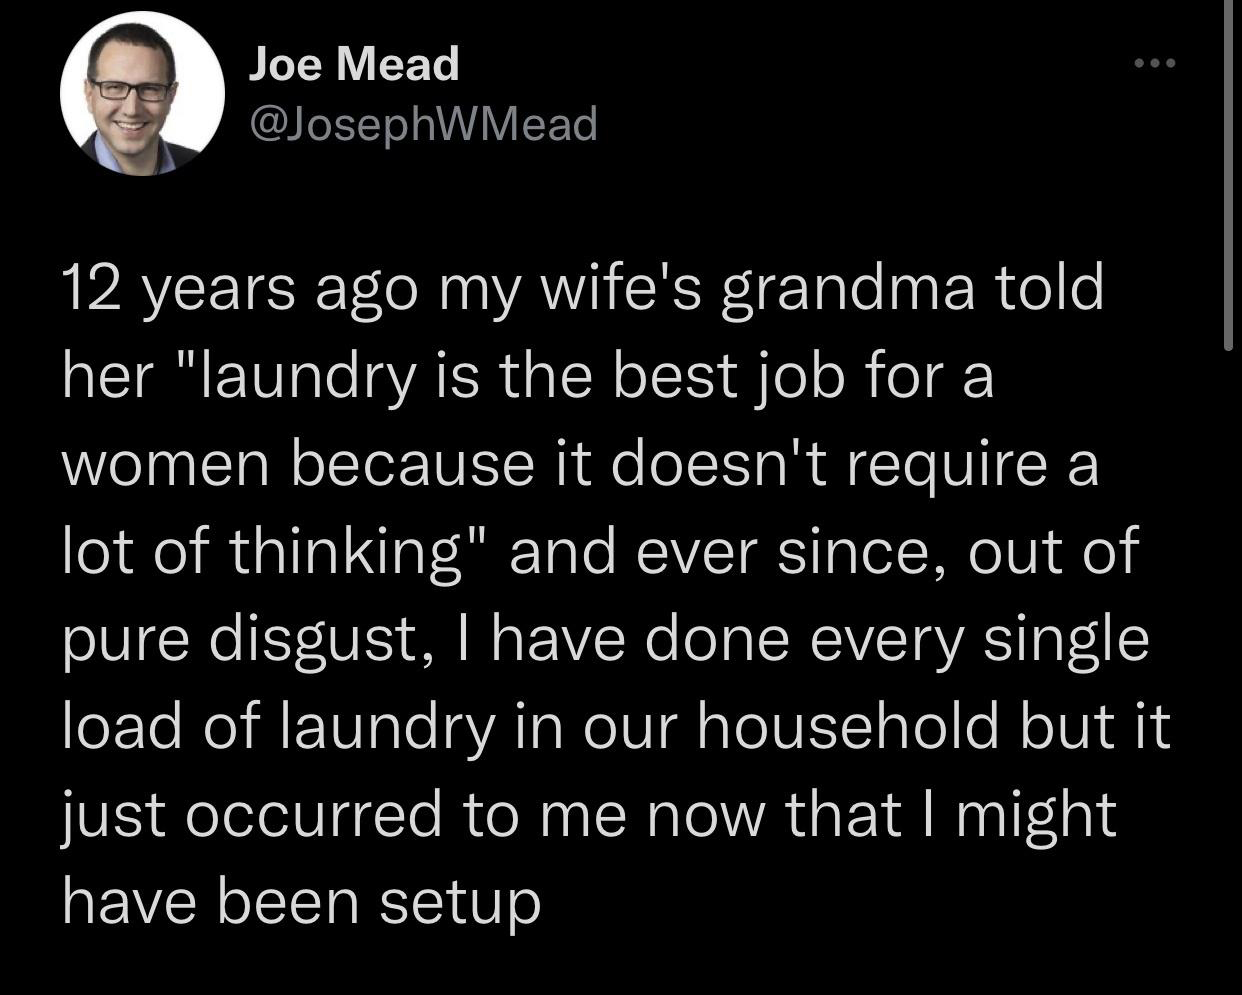 rhetorical question about police brutality - Joe Mead 12 years ago my wife's grandma told her "laundry is the best job for a women because it doesn't require a lot of thinking" and ever since, out of pure disgust, I have done every single load of laundry 